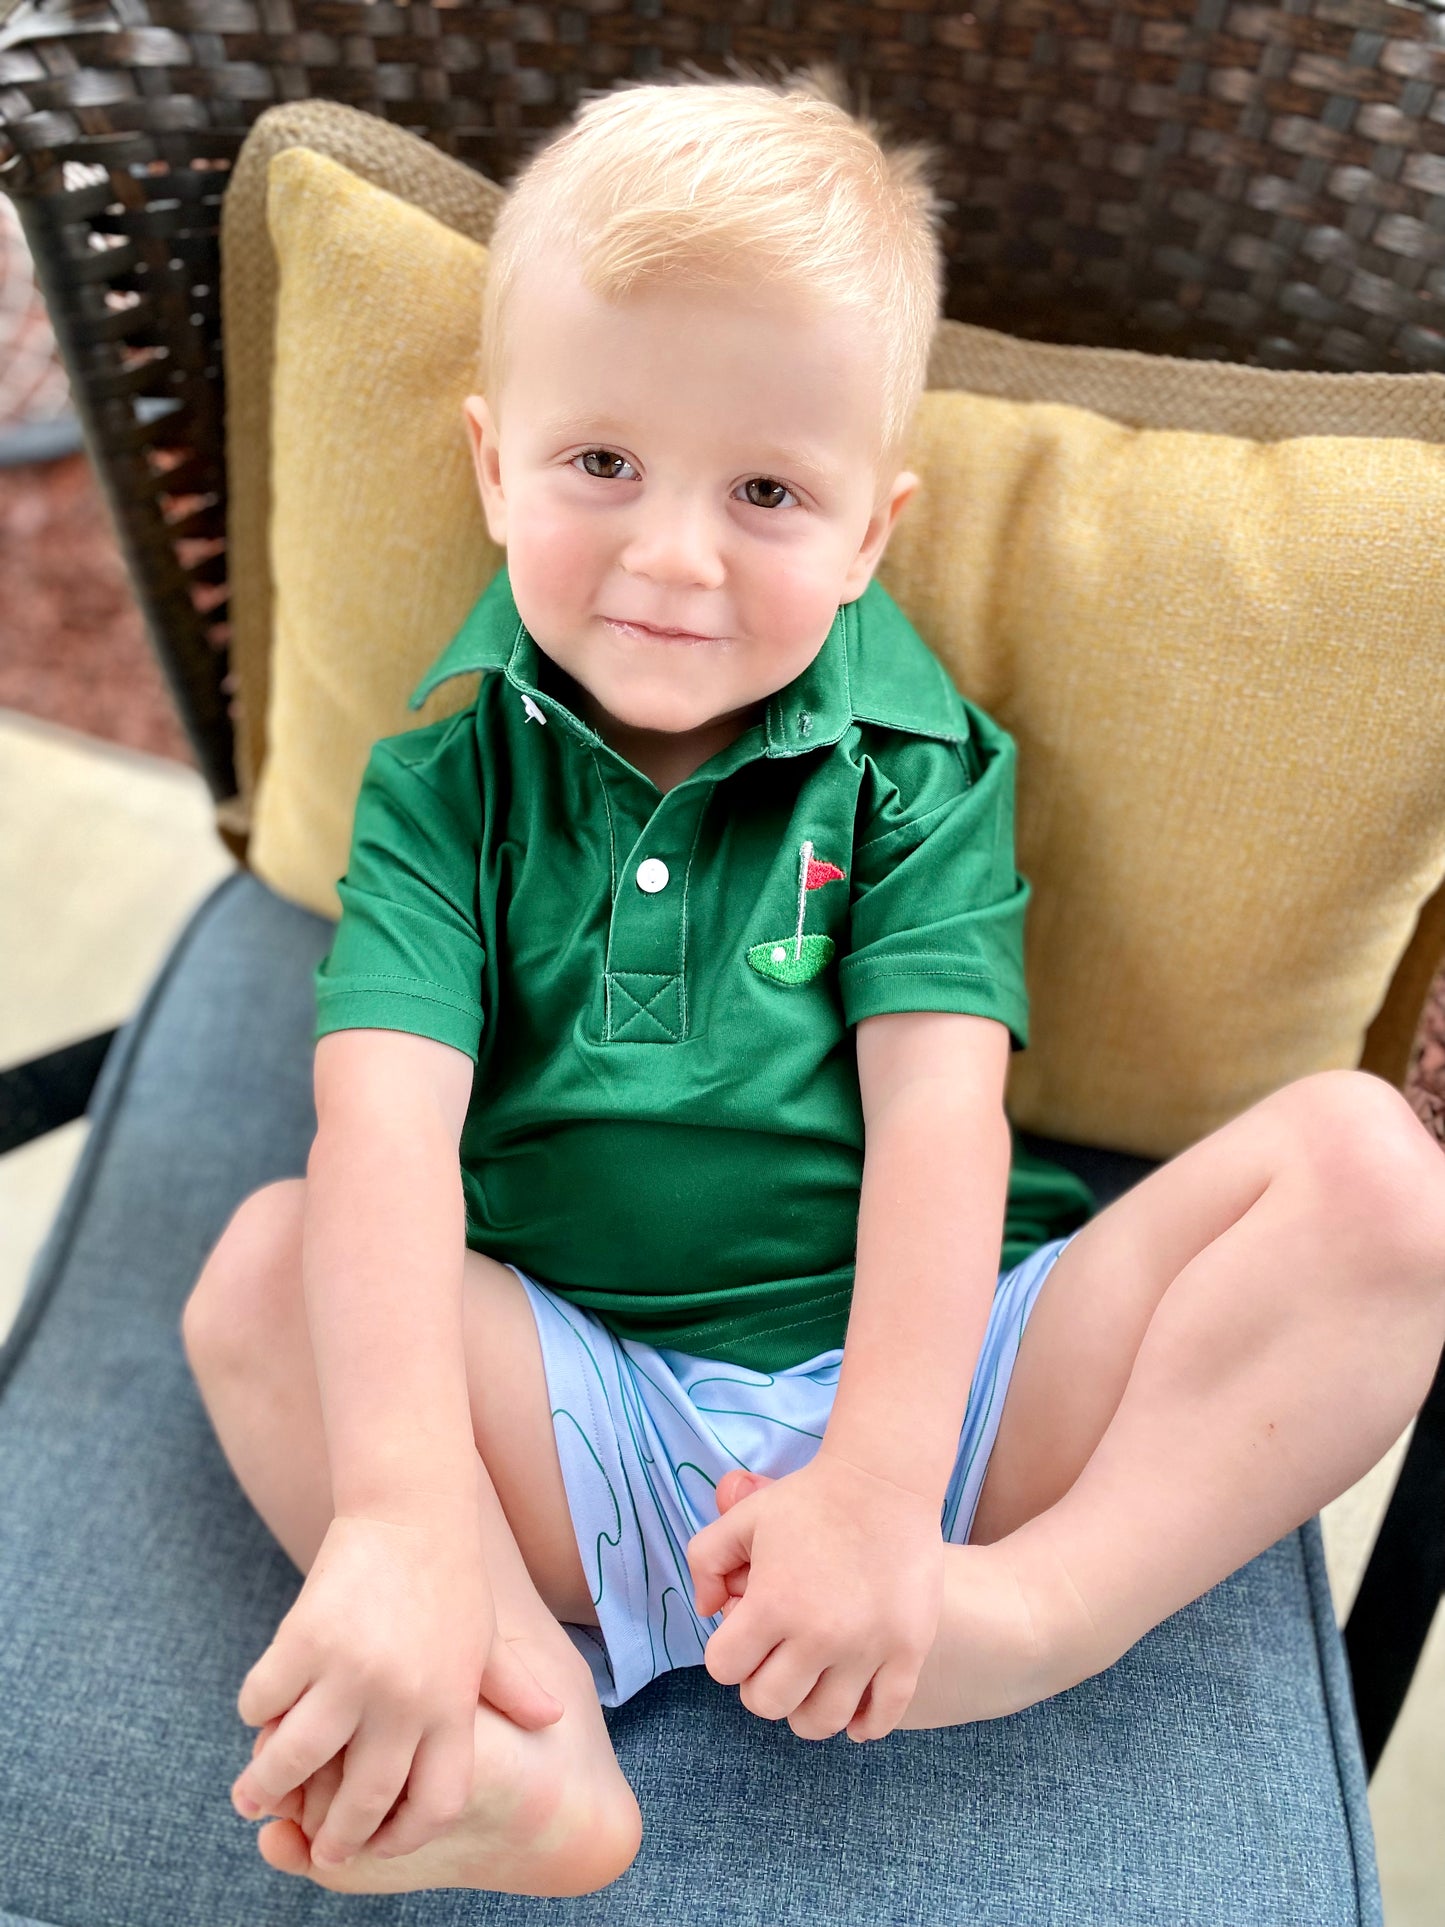 Playing On The Greens Boys Shorts Set